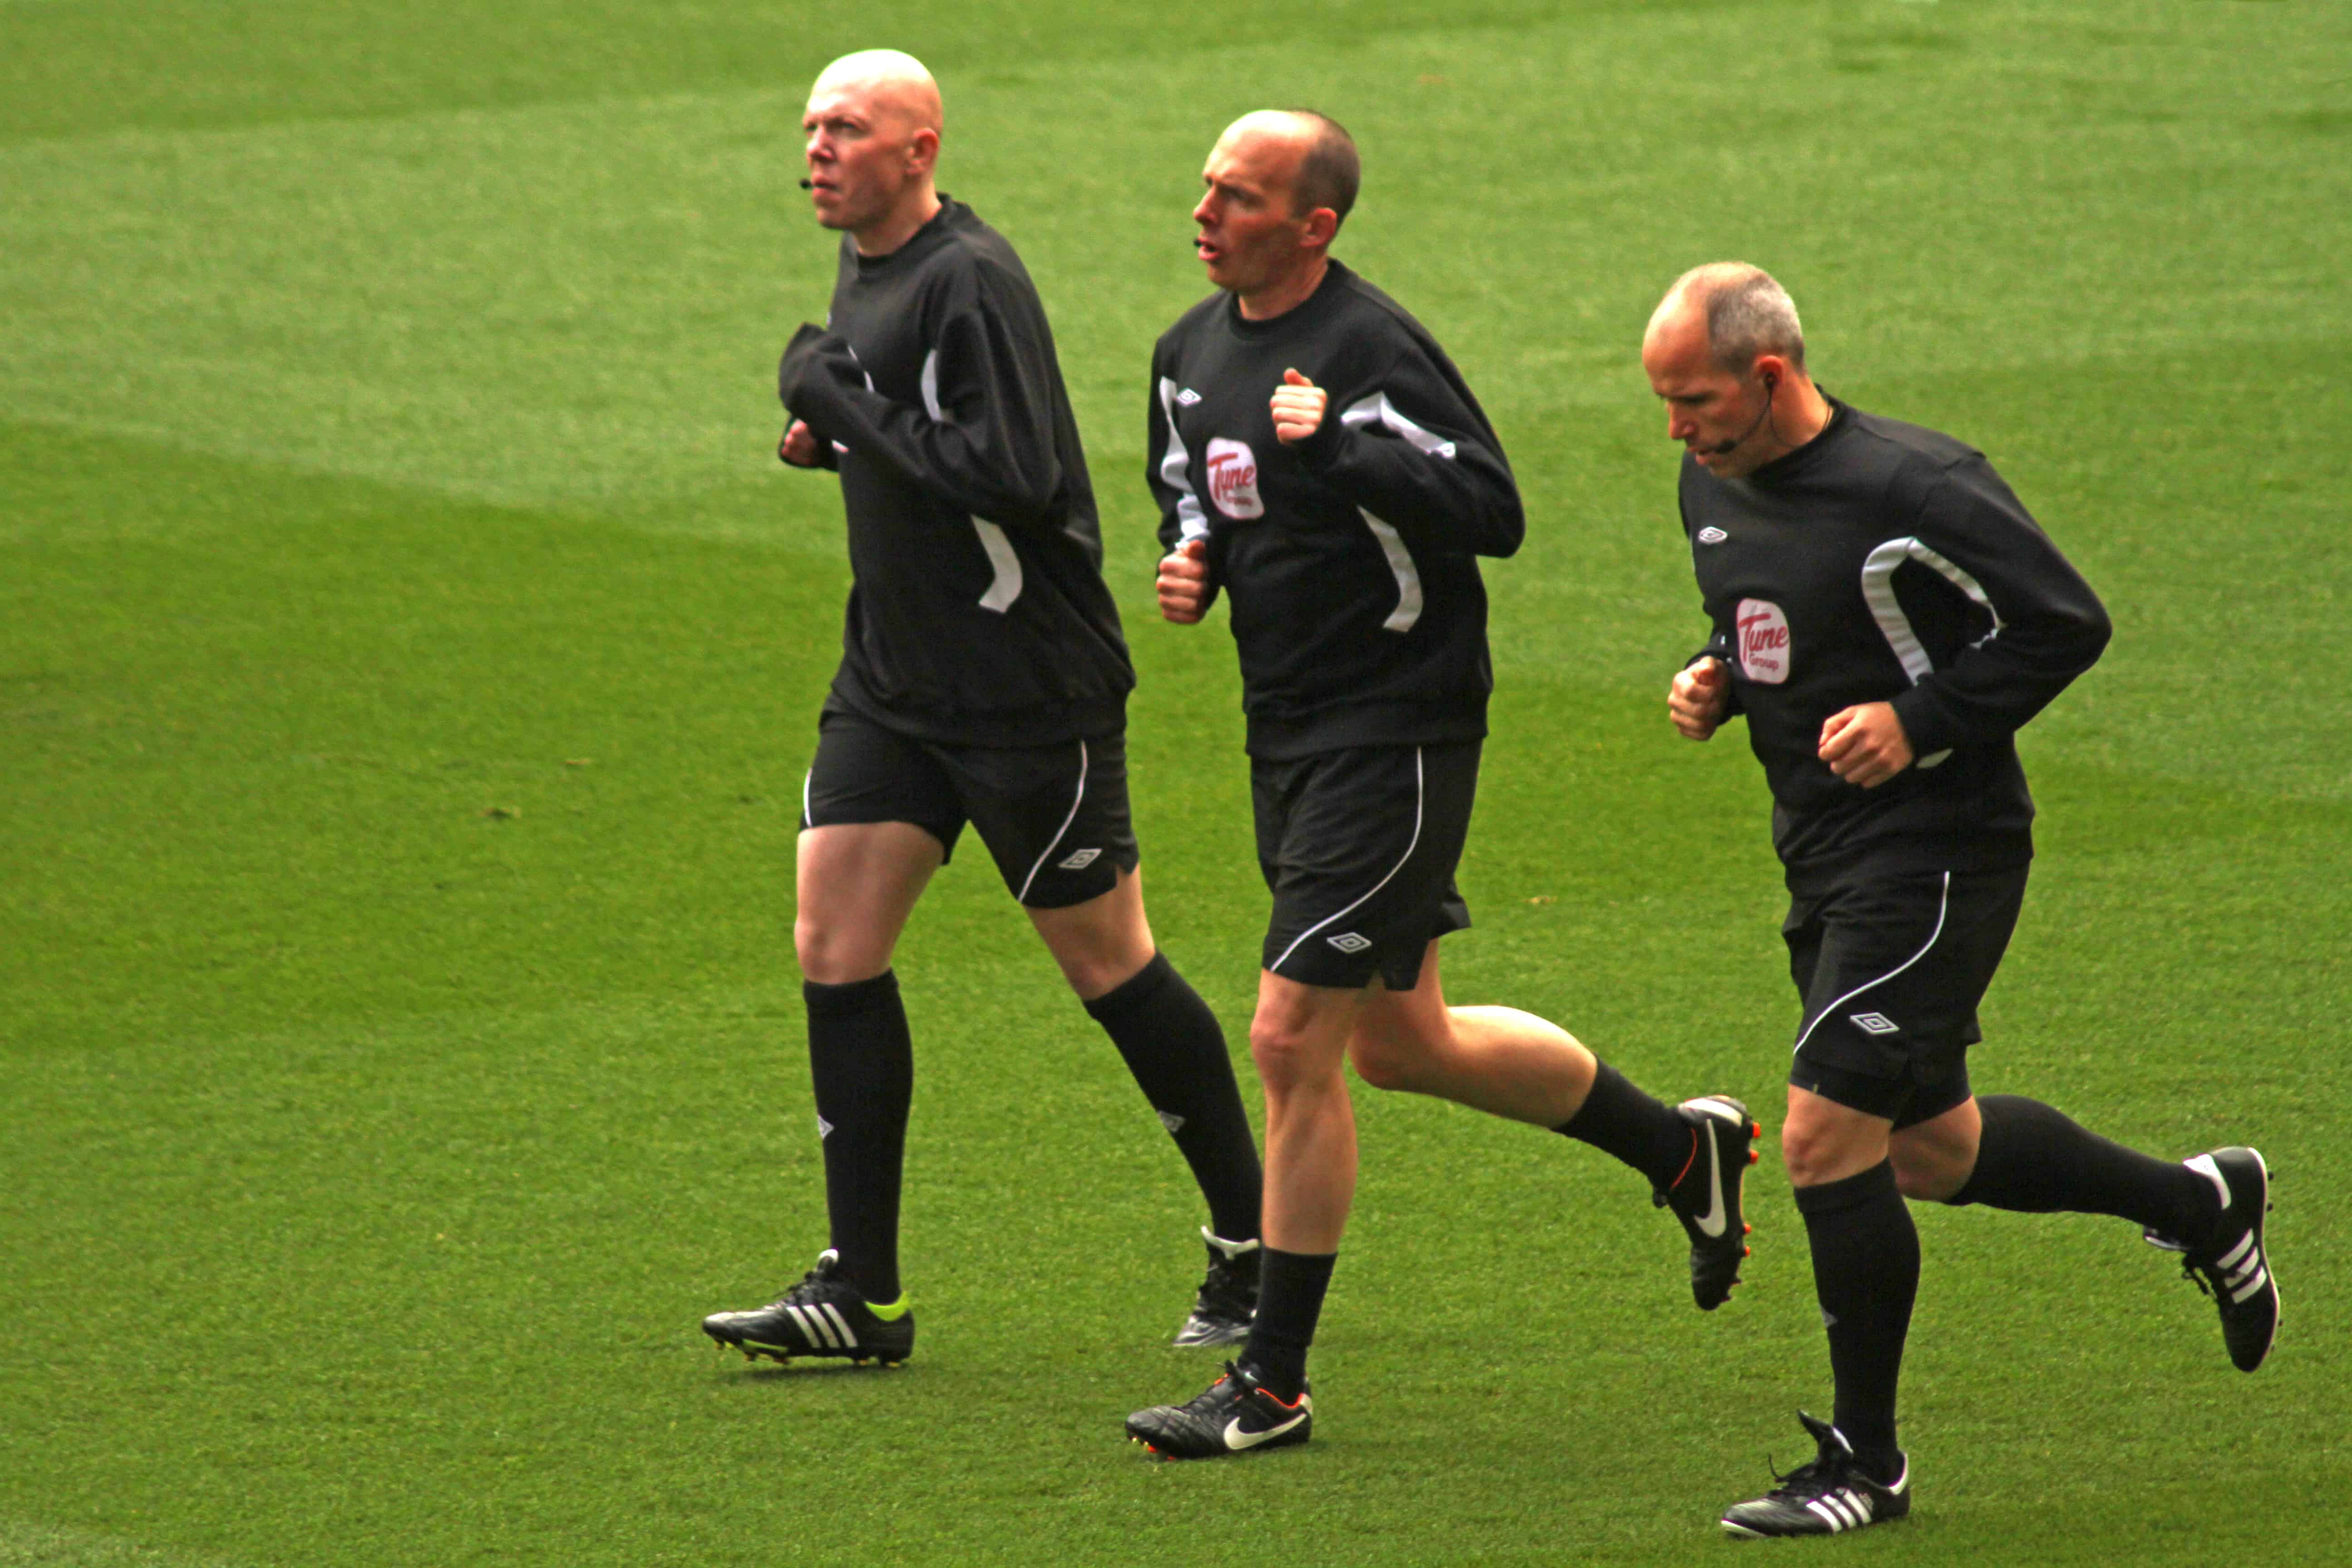 Referees_warm_up